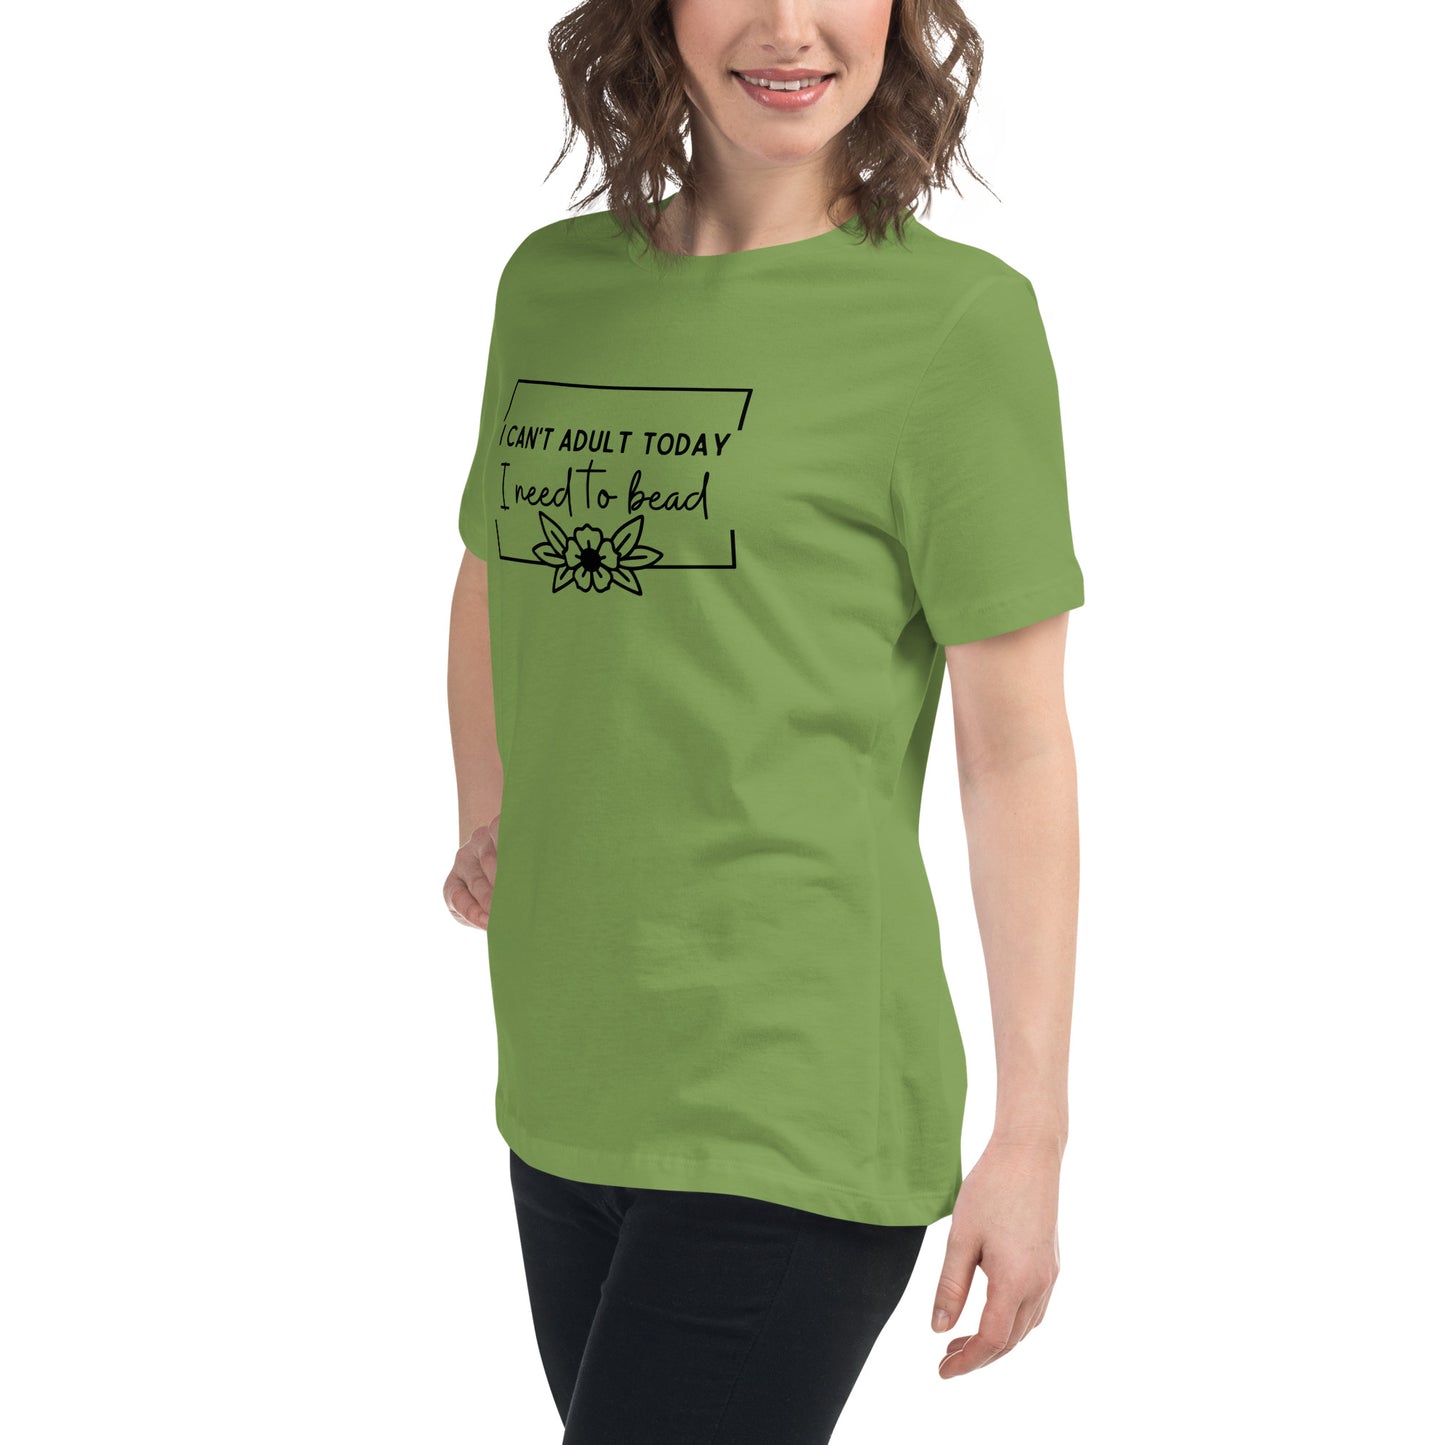 Can't Adult Today Relaxed T-Shirt